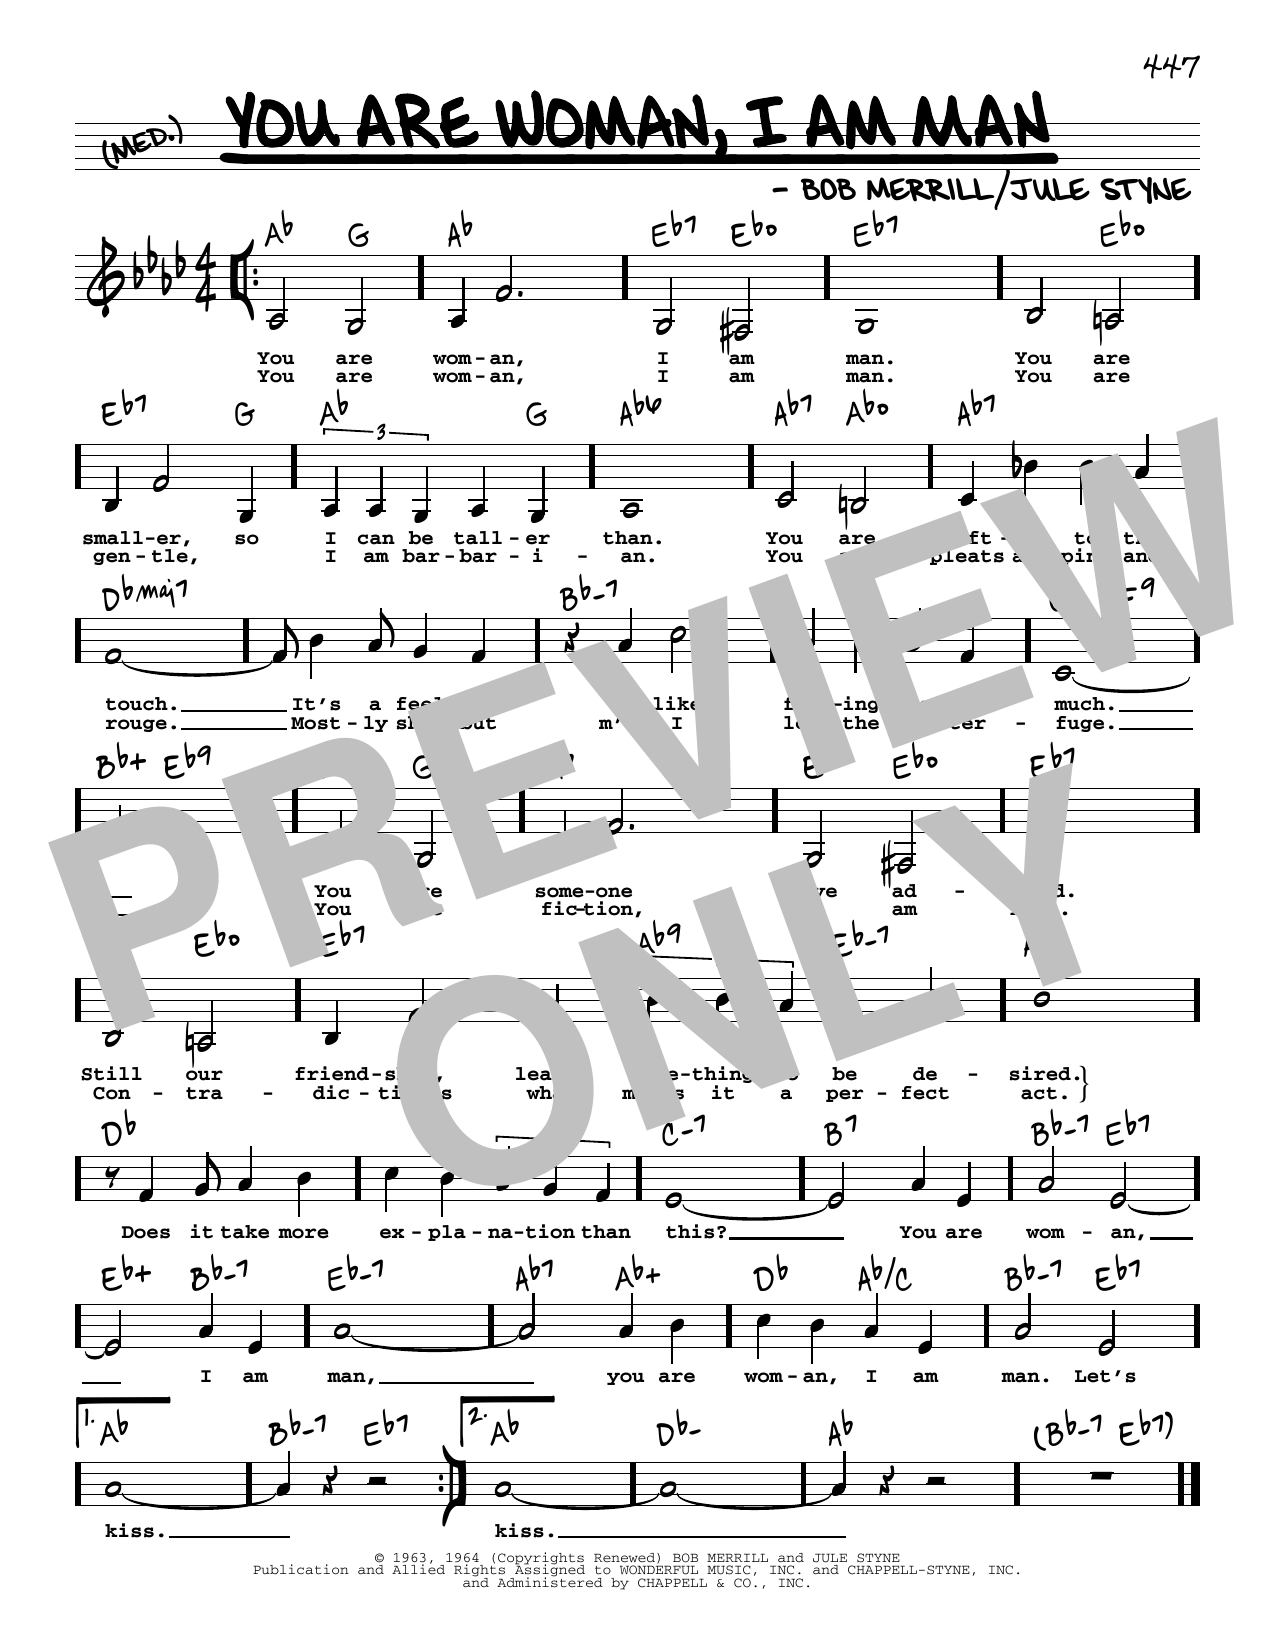 Download Bob Merrill You Are Woman, I Am Man (Low Voice) Sheet Music